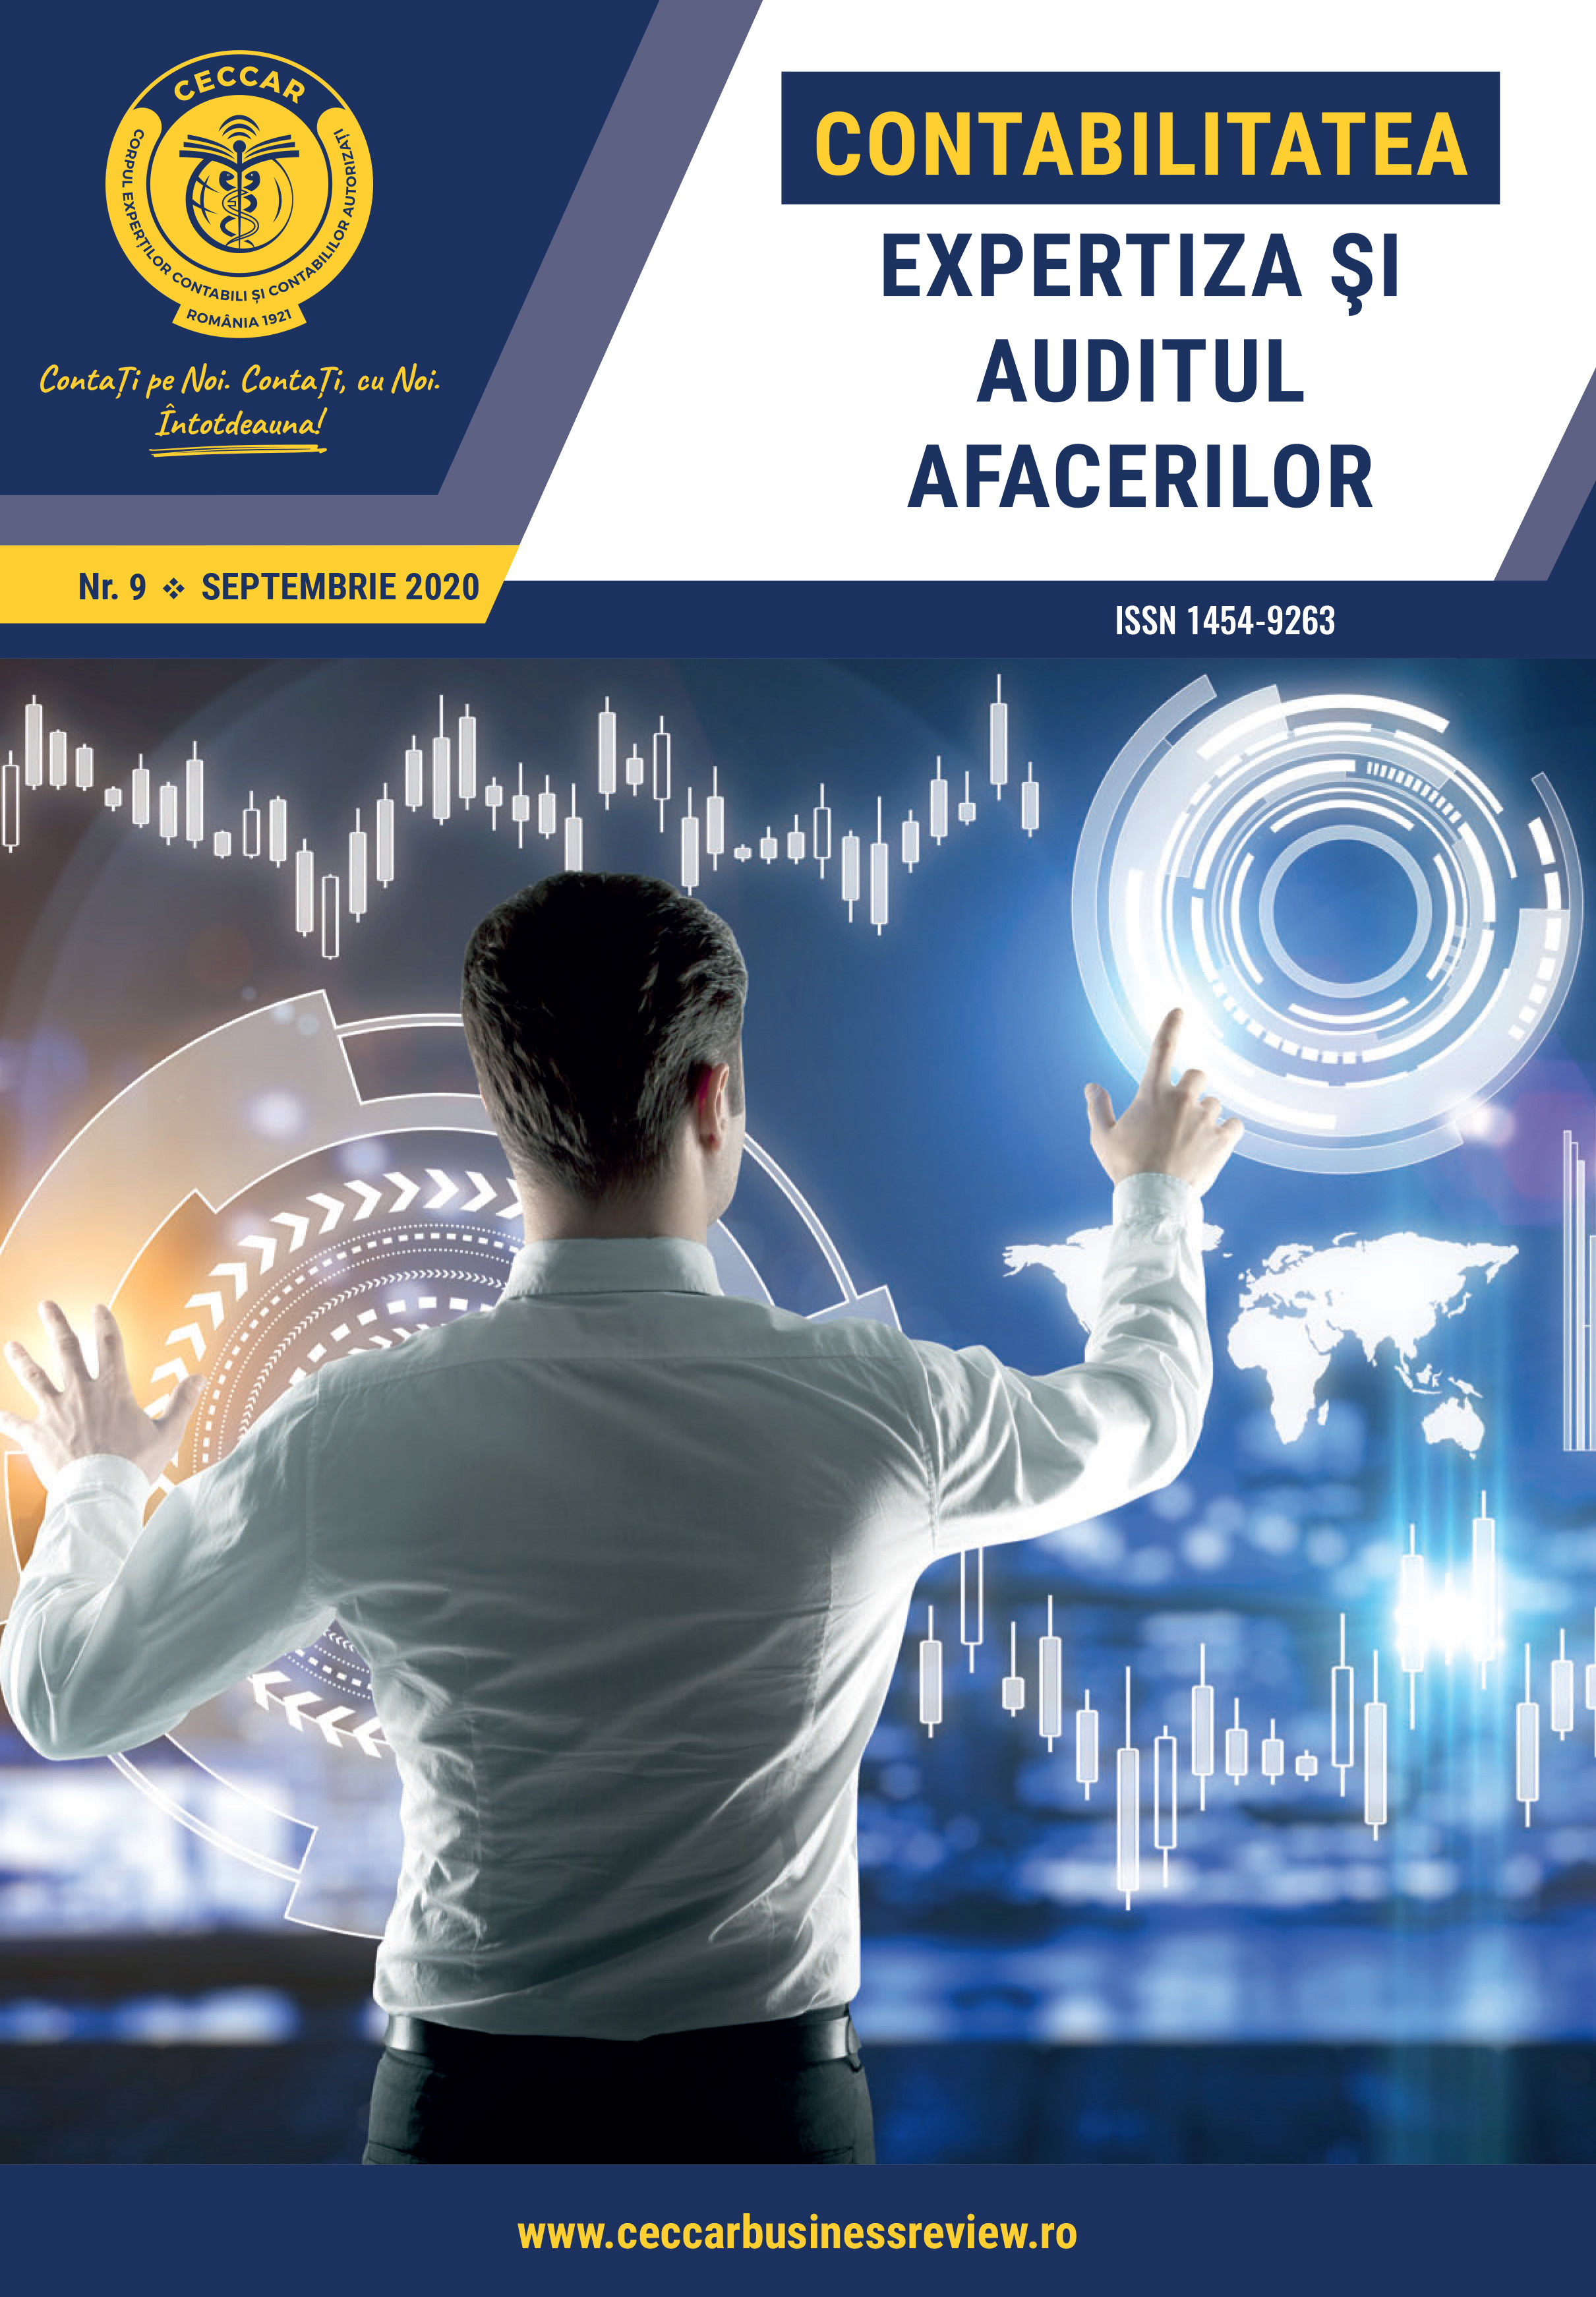 Case Studies Regarding Accounting Expertise in Criminal Cases (II) Cover Image